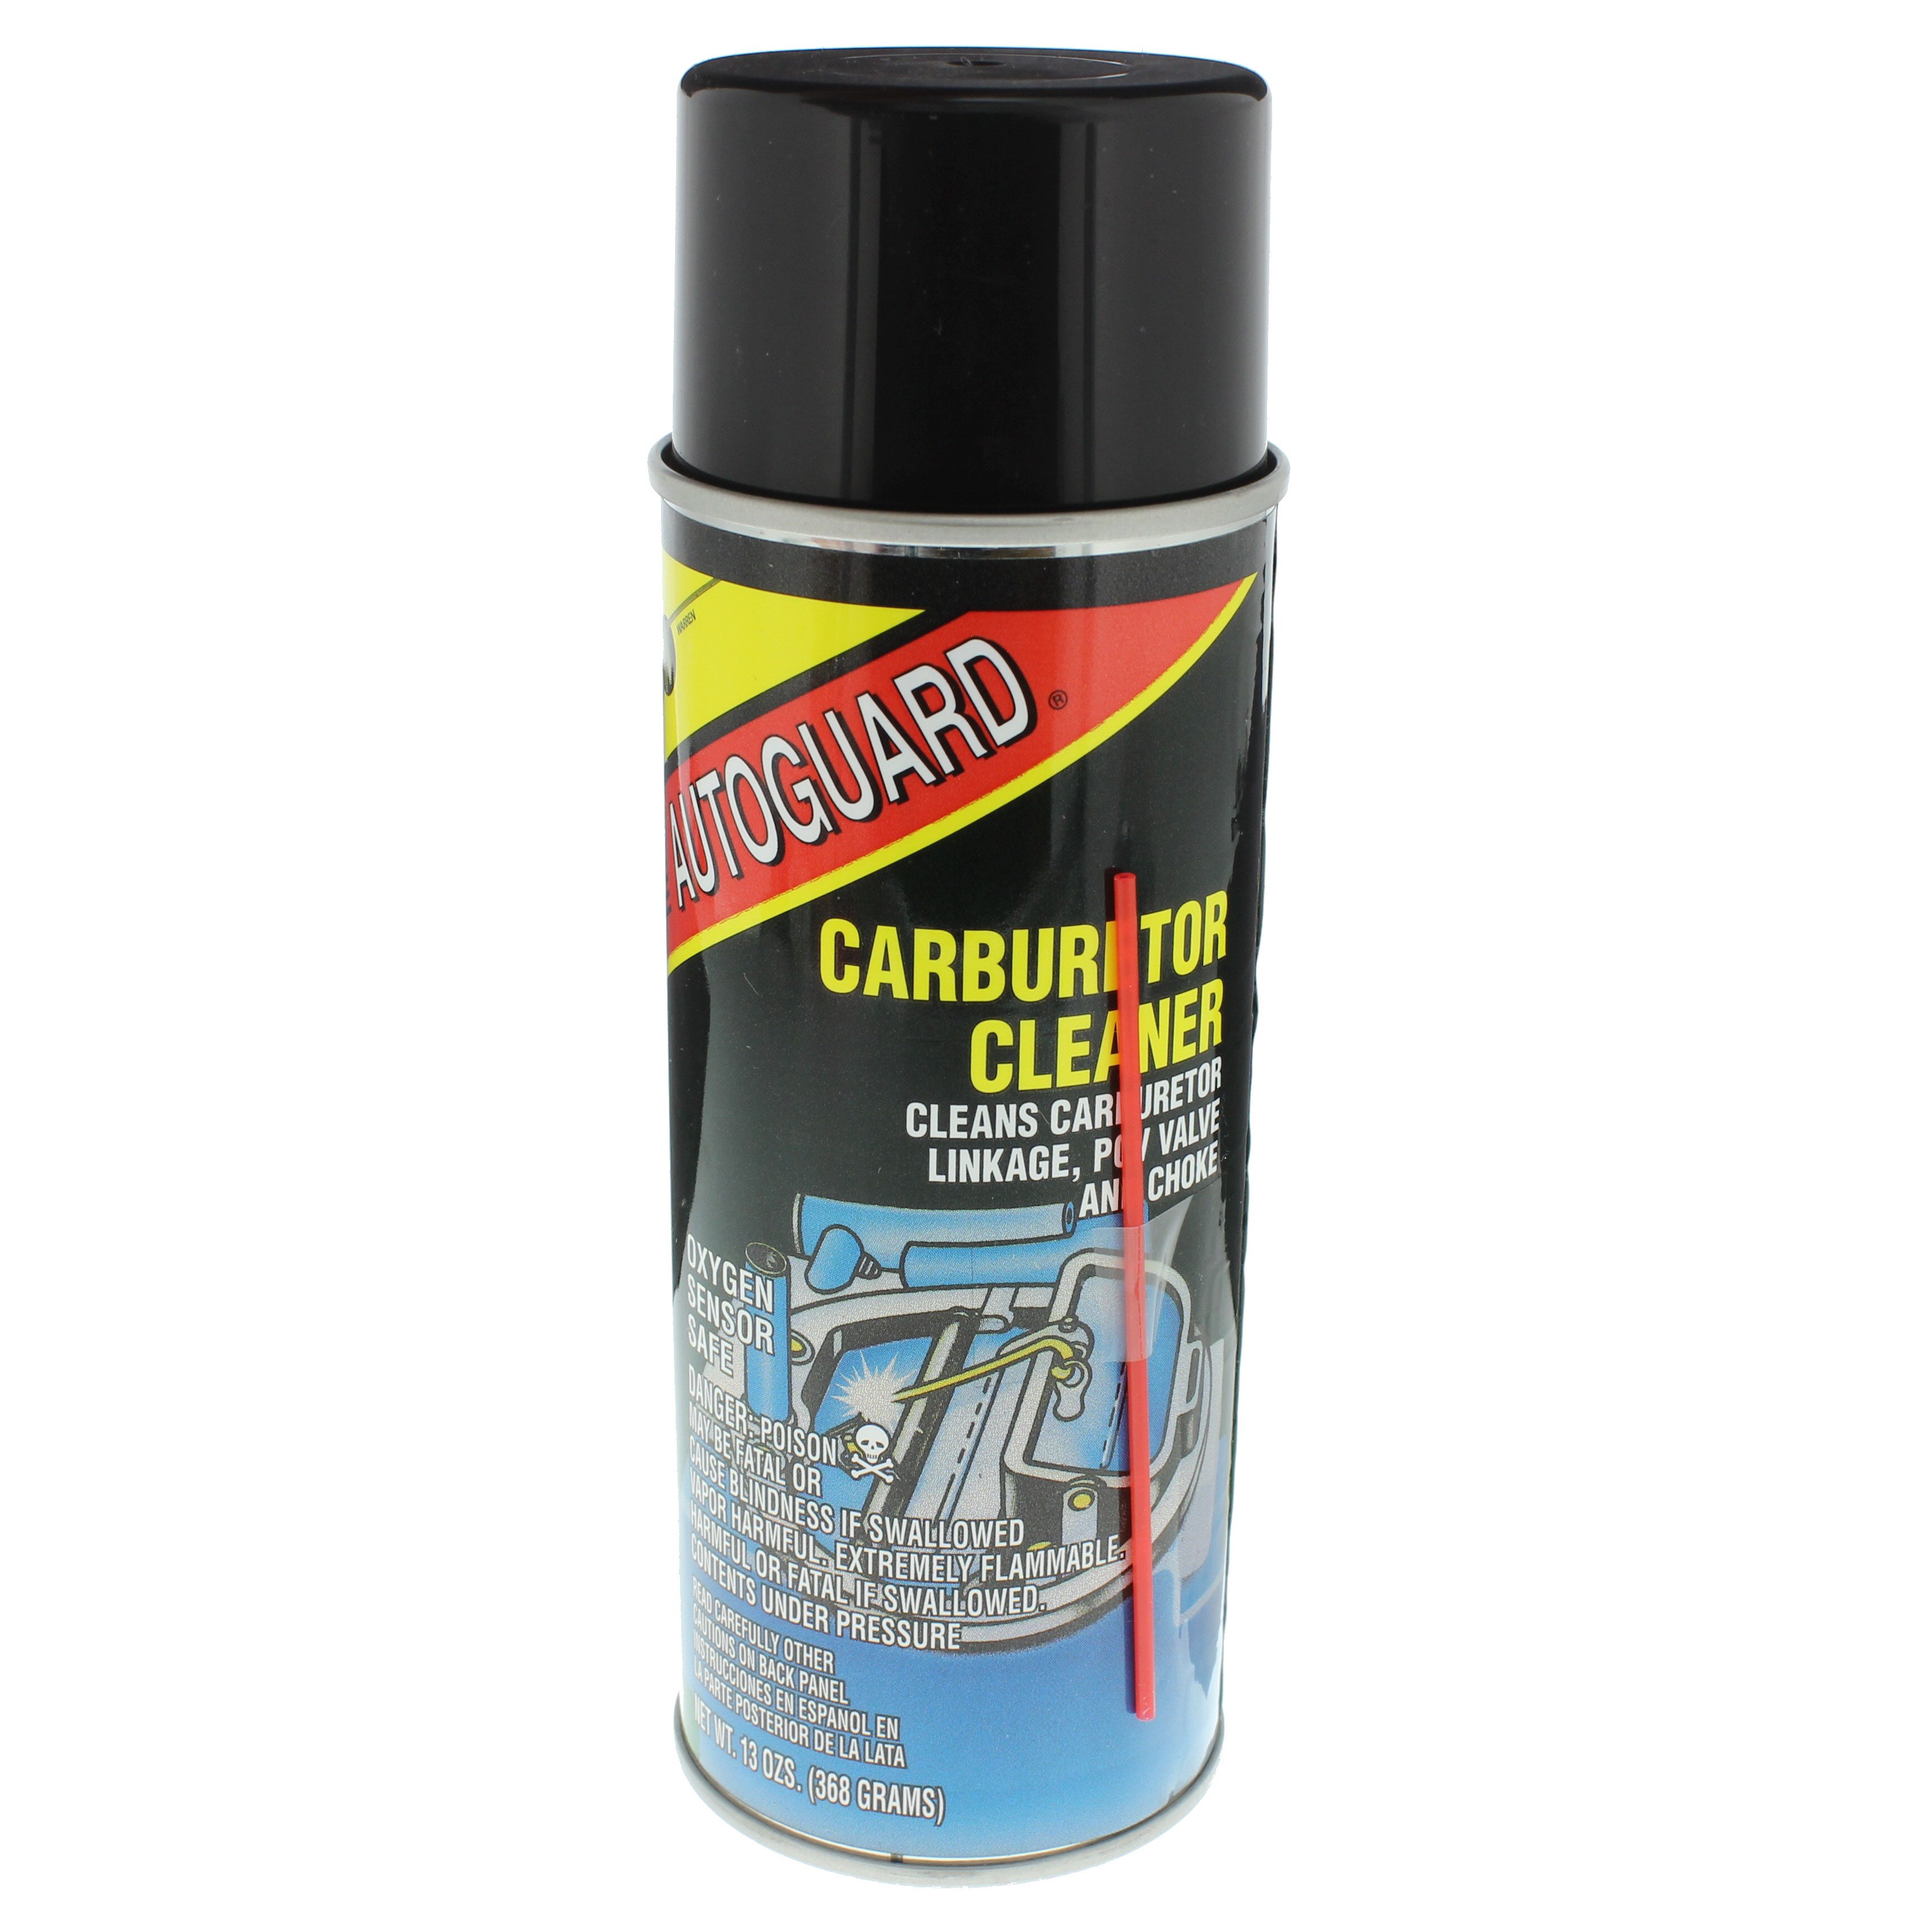 Carb clean. Carb Cleaner Mr car 9933. F1 Carb Cleaner Spray 450ml- оригинал.. Быстрый старт. Injection Carb Cleaner.